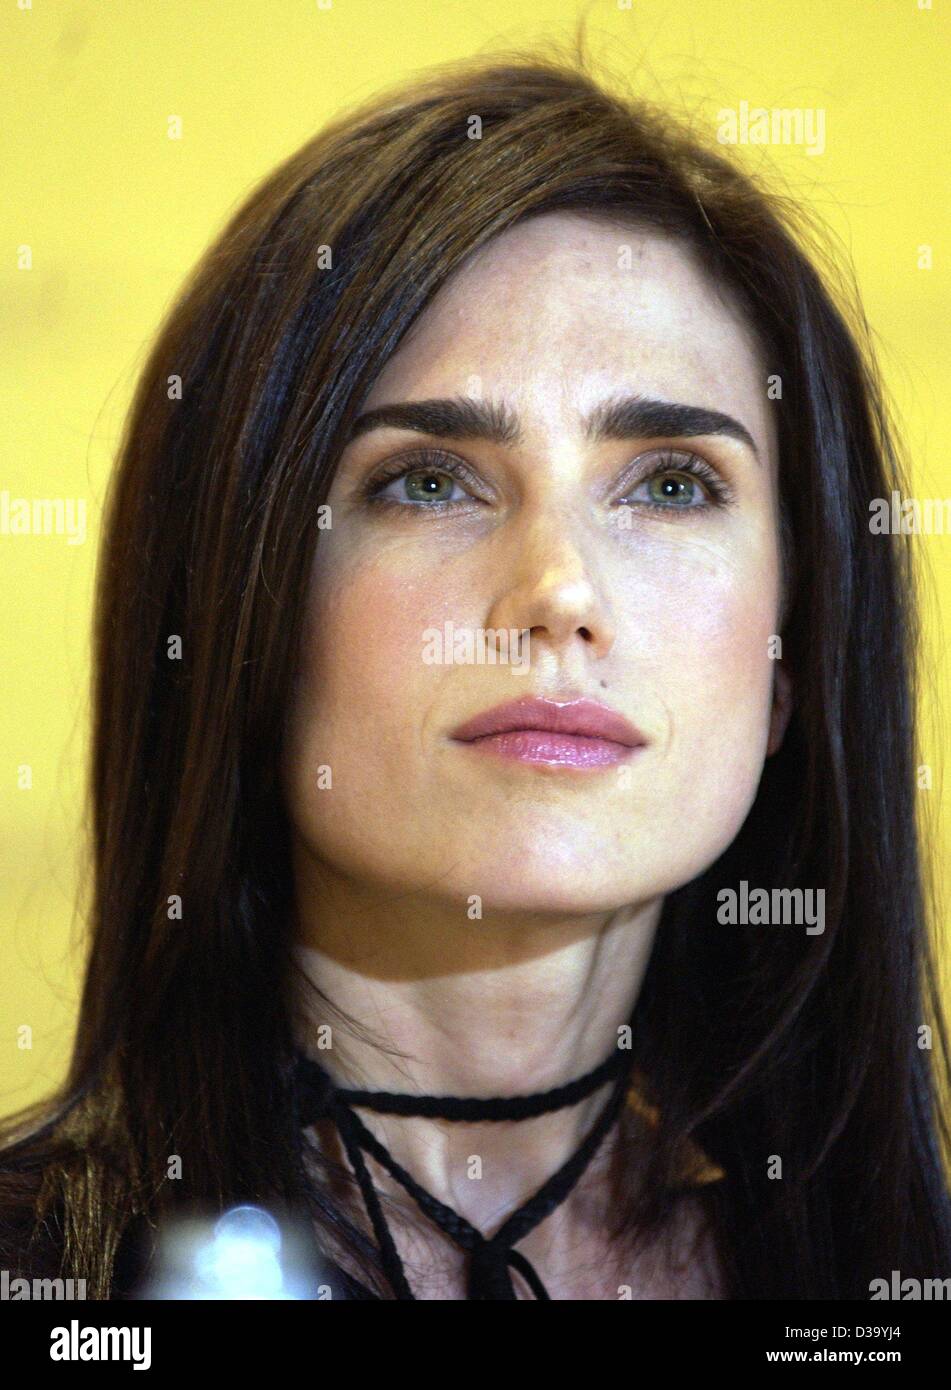 (dpa) - Berlinale: US Actress Jennifer Connelly presents her new film 'A Beautiful Mind' at the 52. International Film Festival in Berlin, 12.2.2002. The movie is shown at the Berlinale but not as part of the competition to win a trophy. Stock Photo